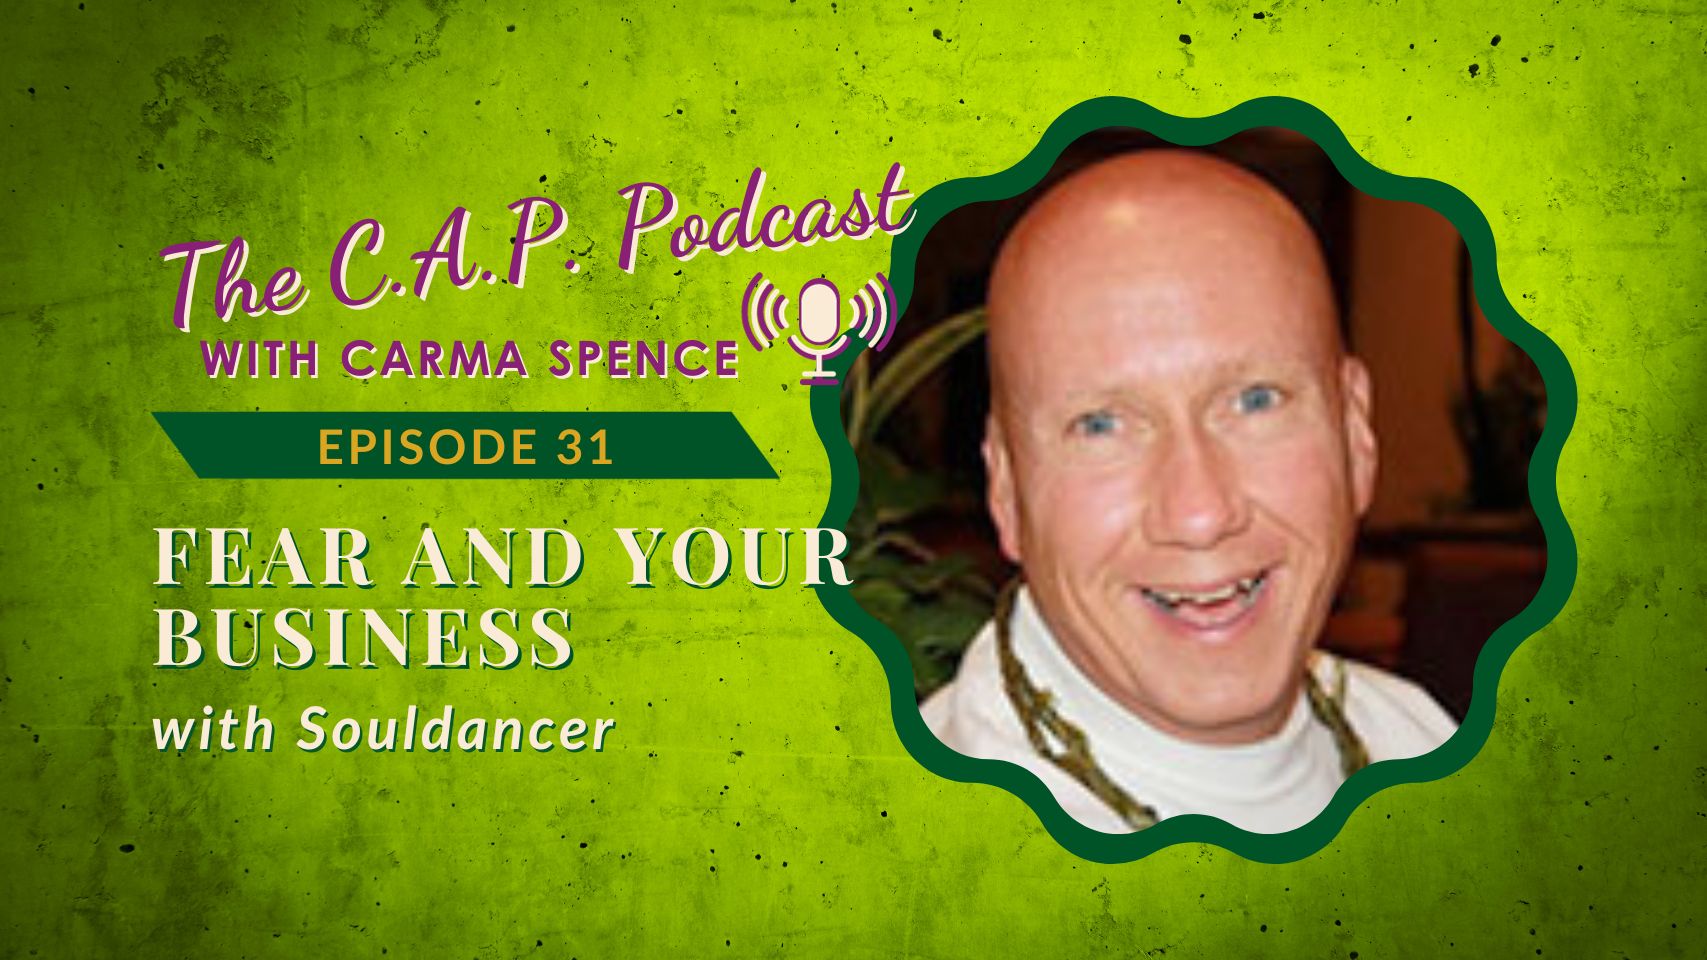 Soudancer, fear and your business